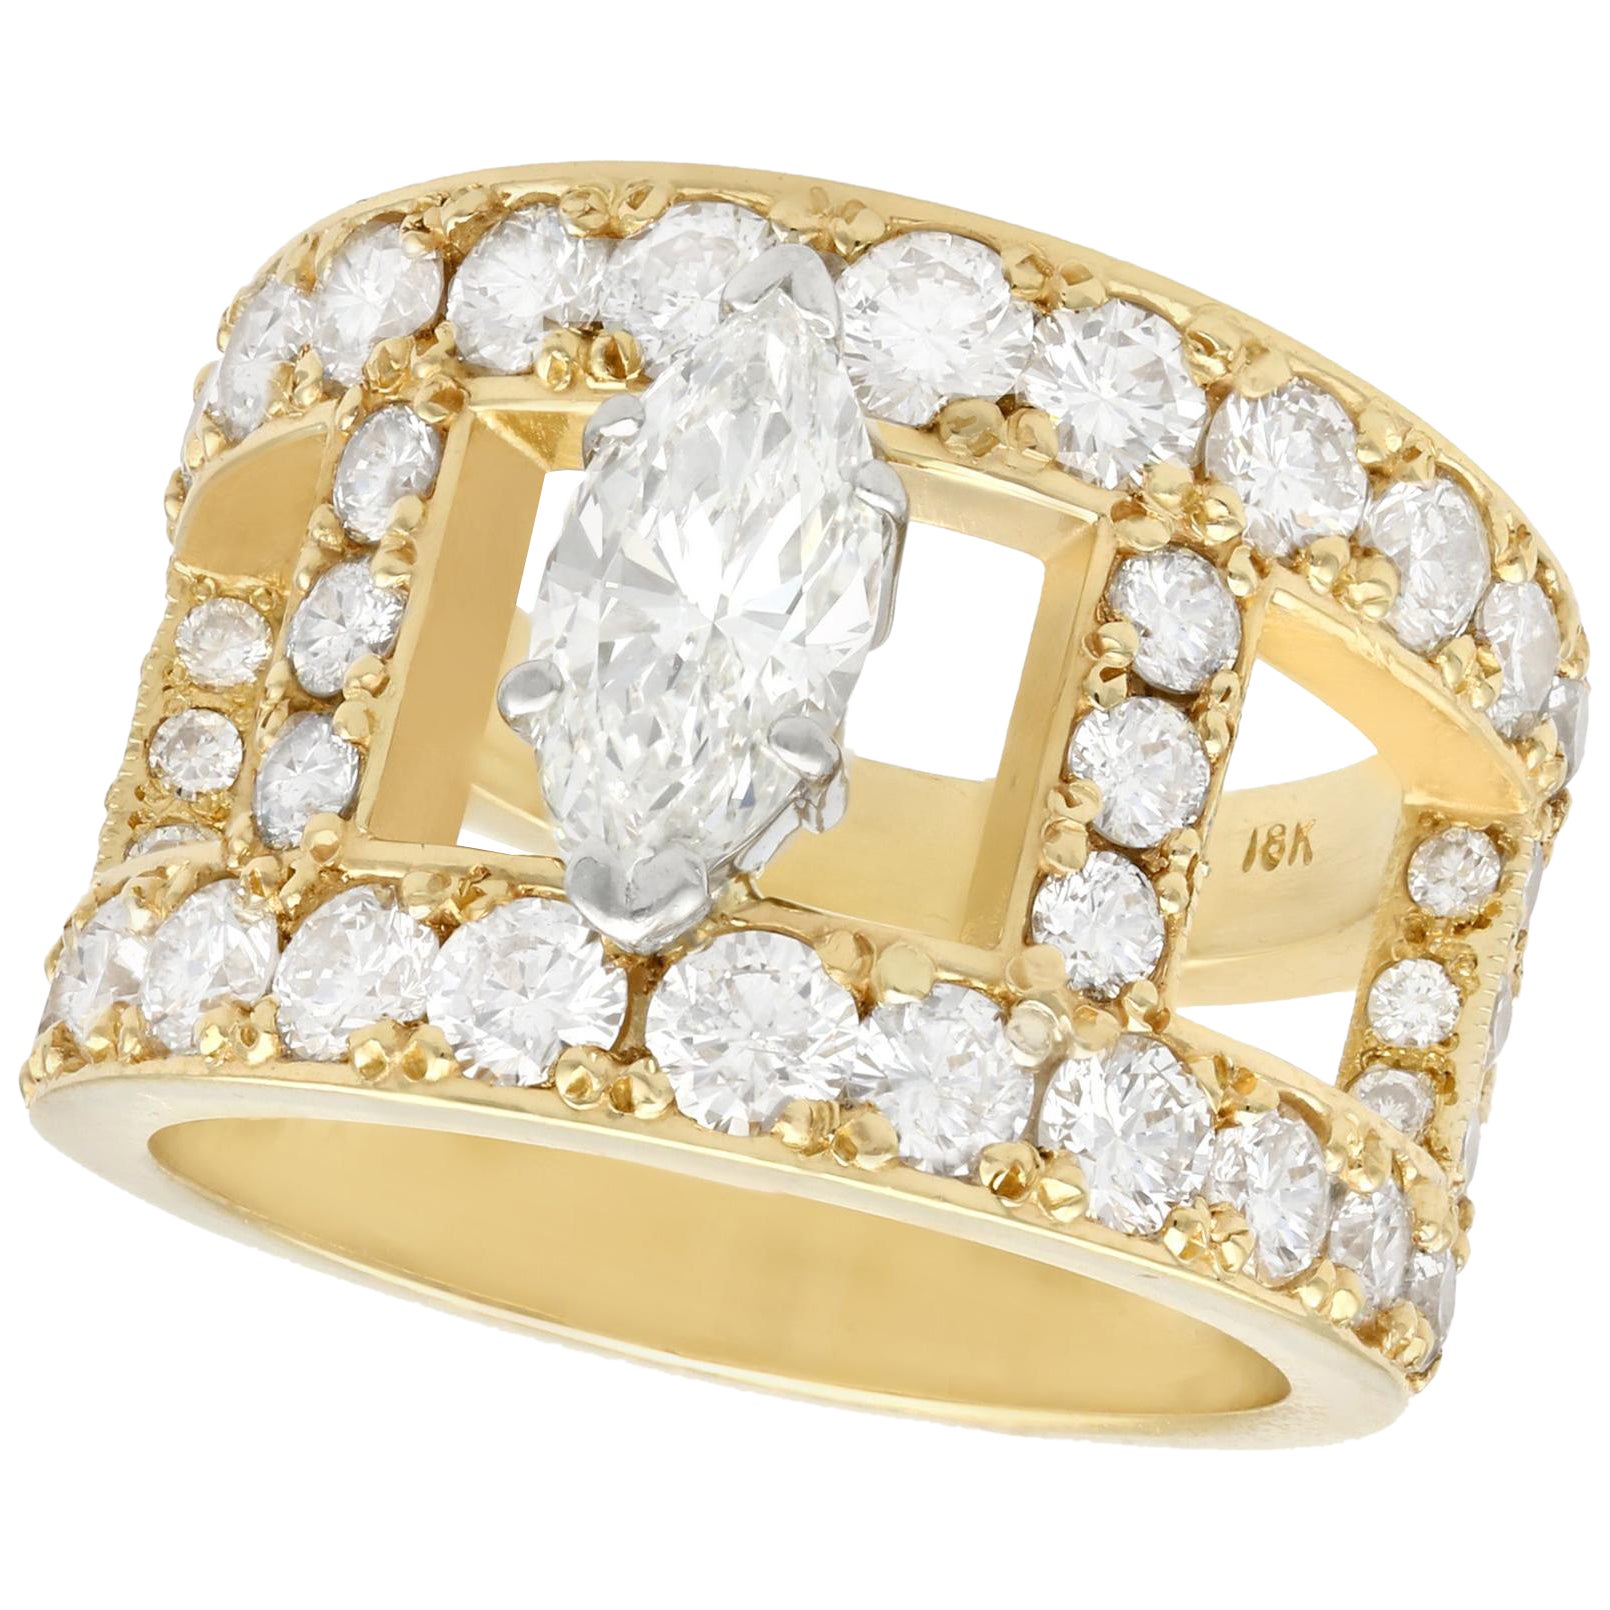 3.93 Carat Diamond and Yellow Gold Cocktail Ring